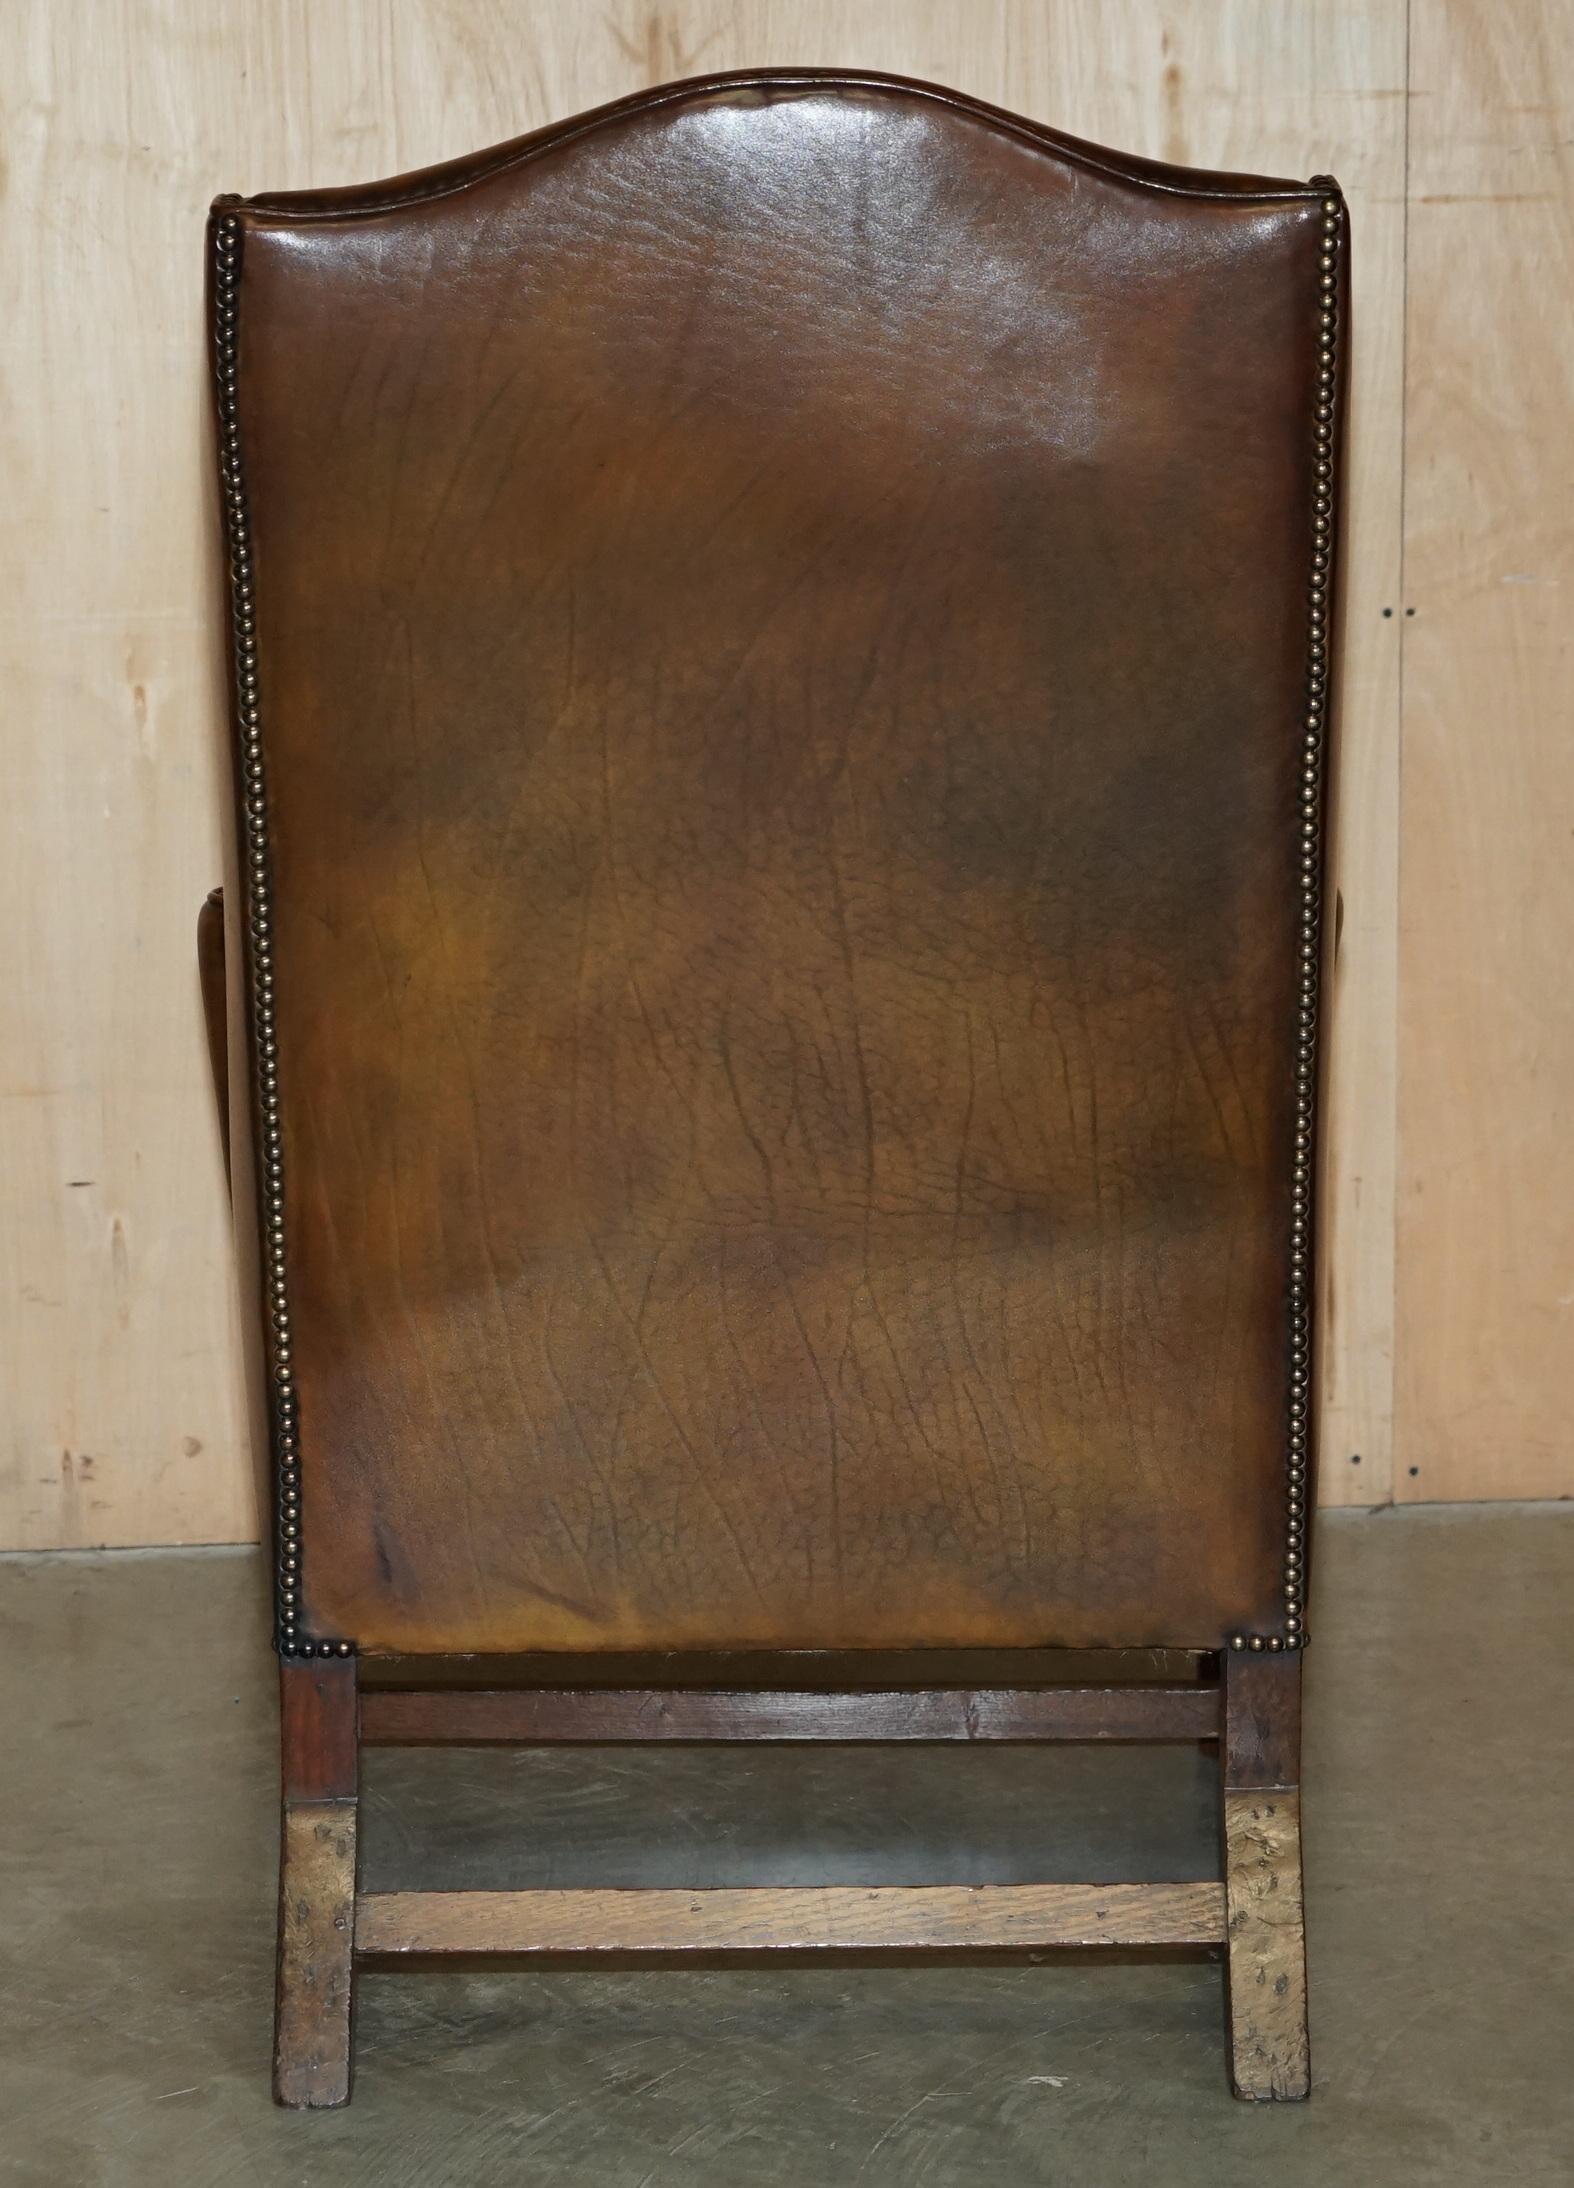 SUPER FINE RESTORED GEORGE III PERIOD CIRCA 1820 WiNGBACK BROWN LEATHER ARMCHAIR For Sale 7